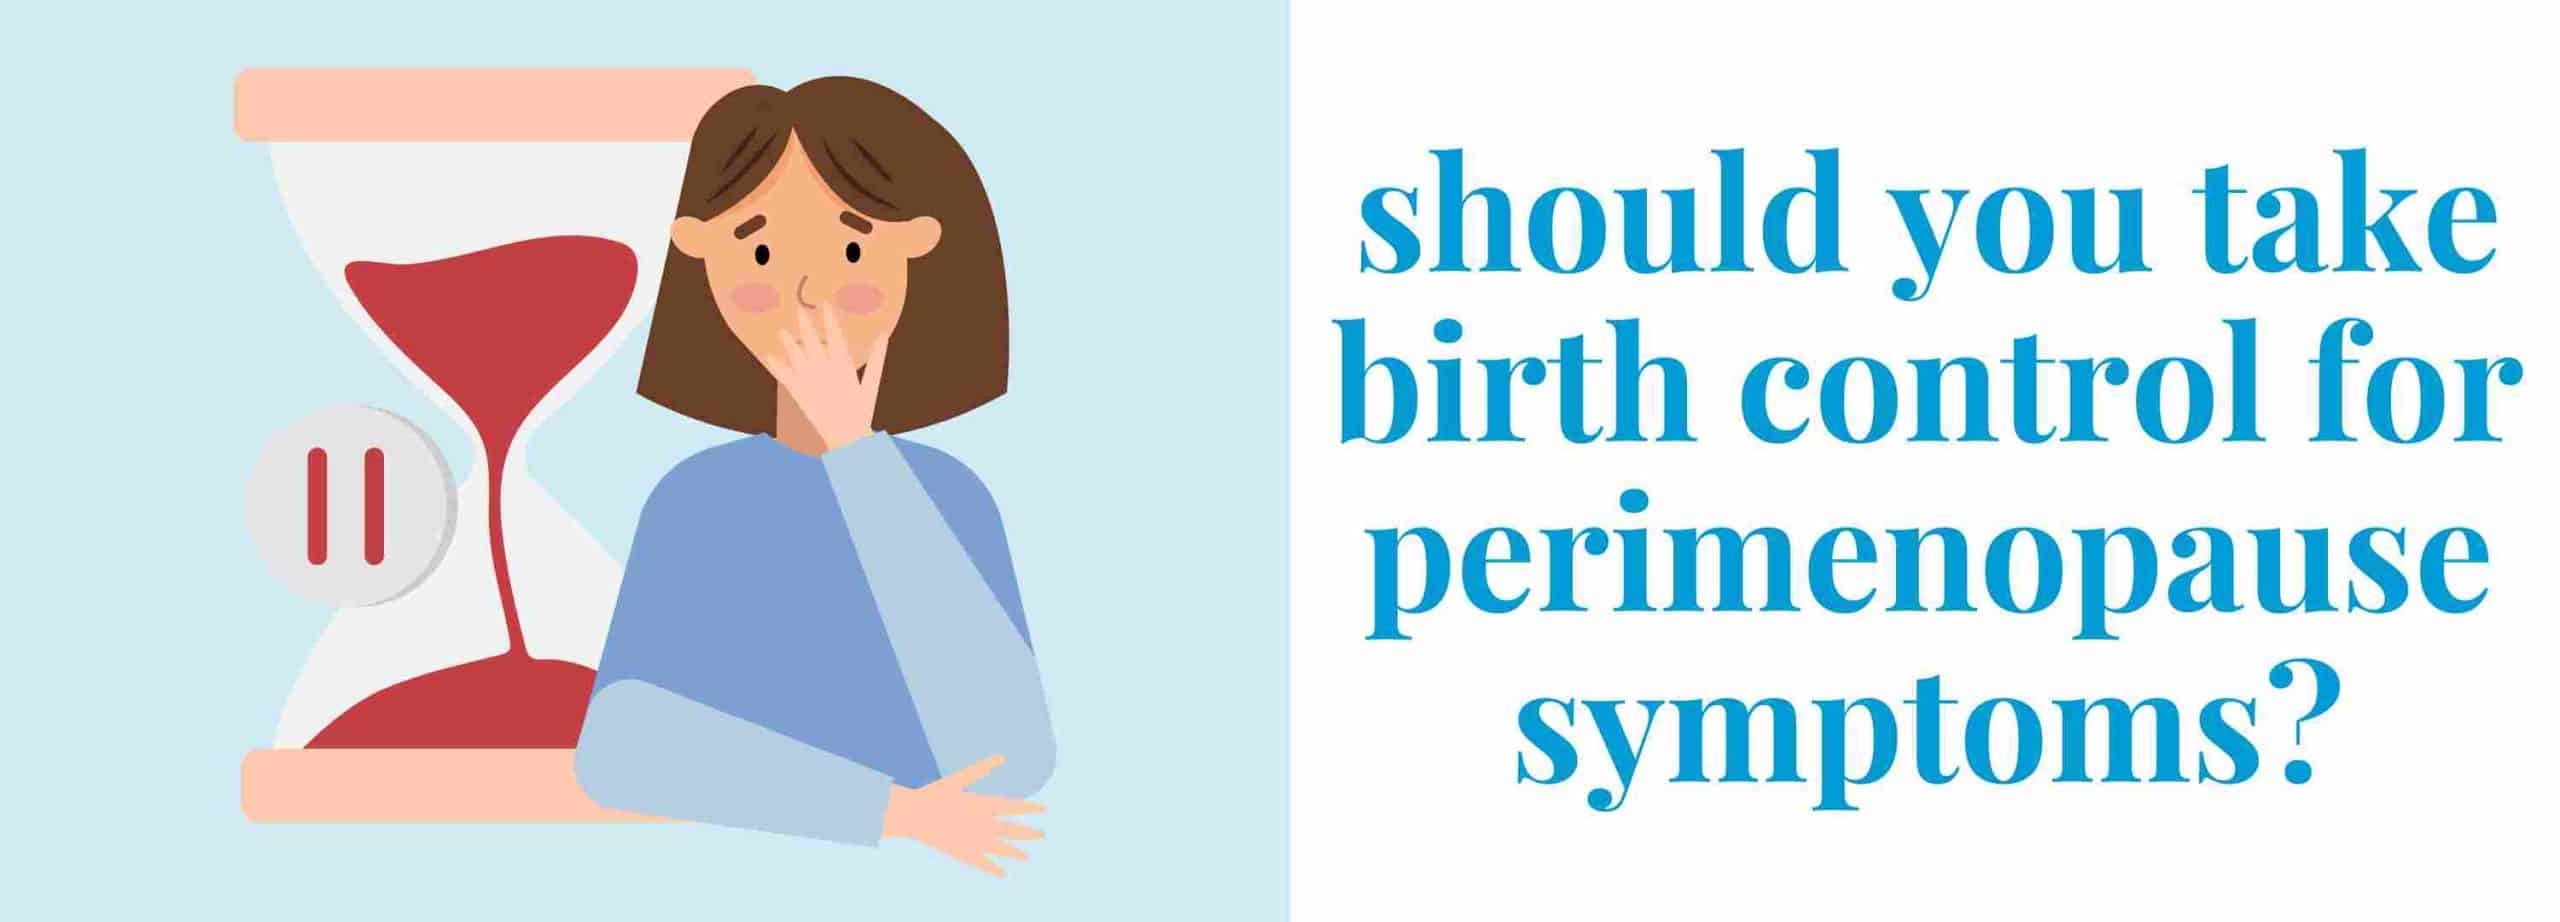 Perimenopause symptoms: signs, prognosis, differences to menopause